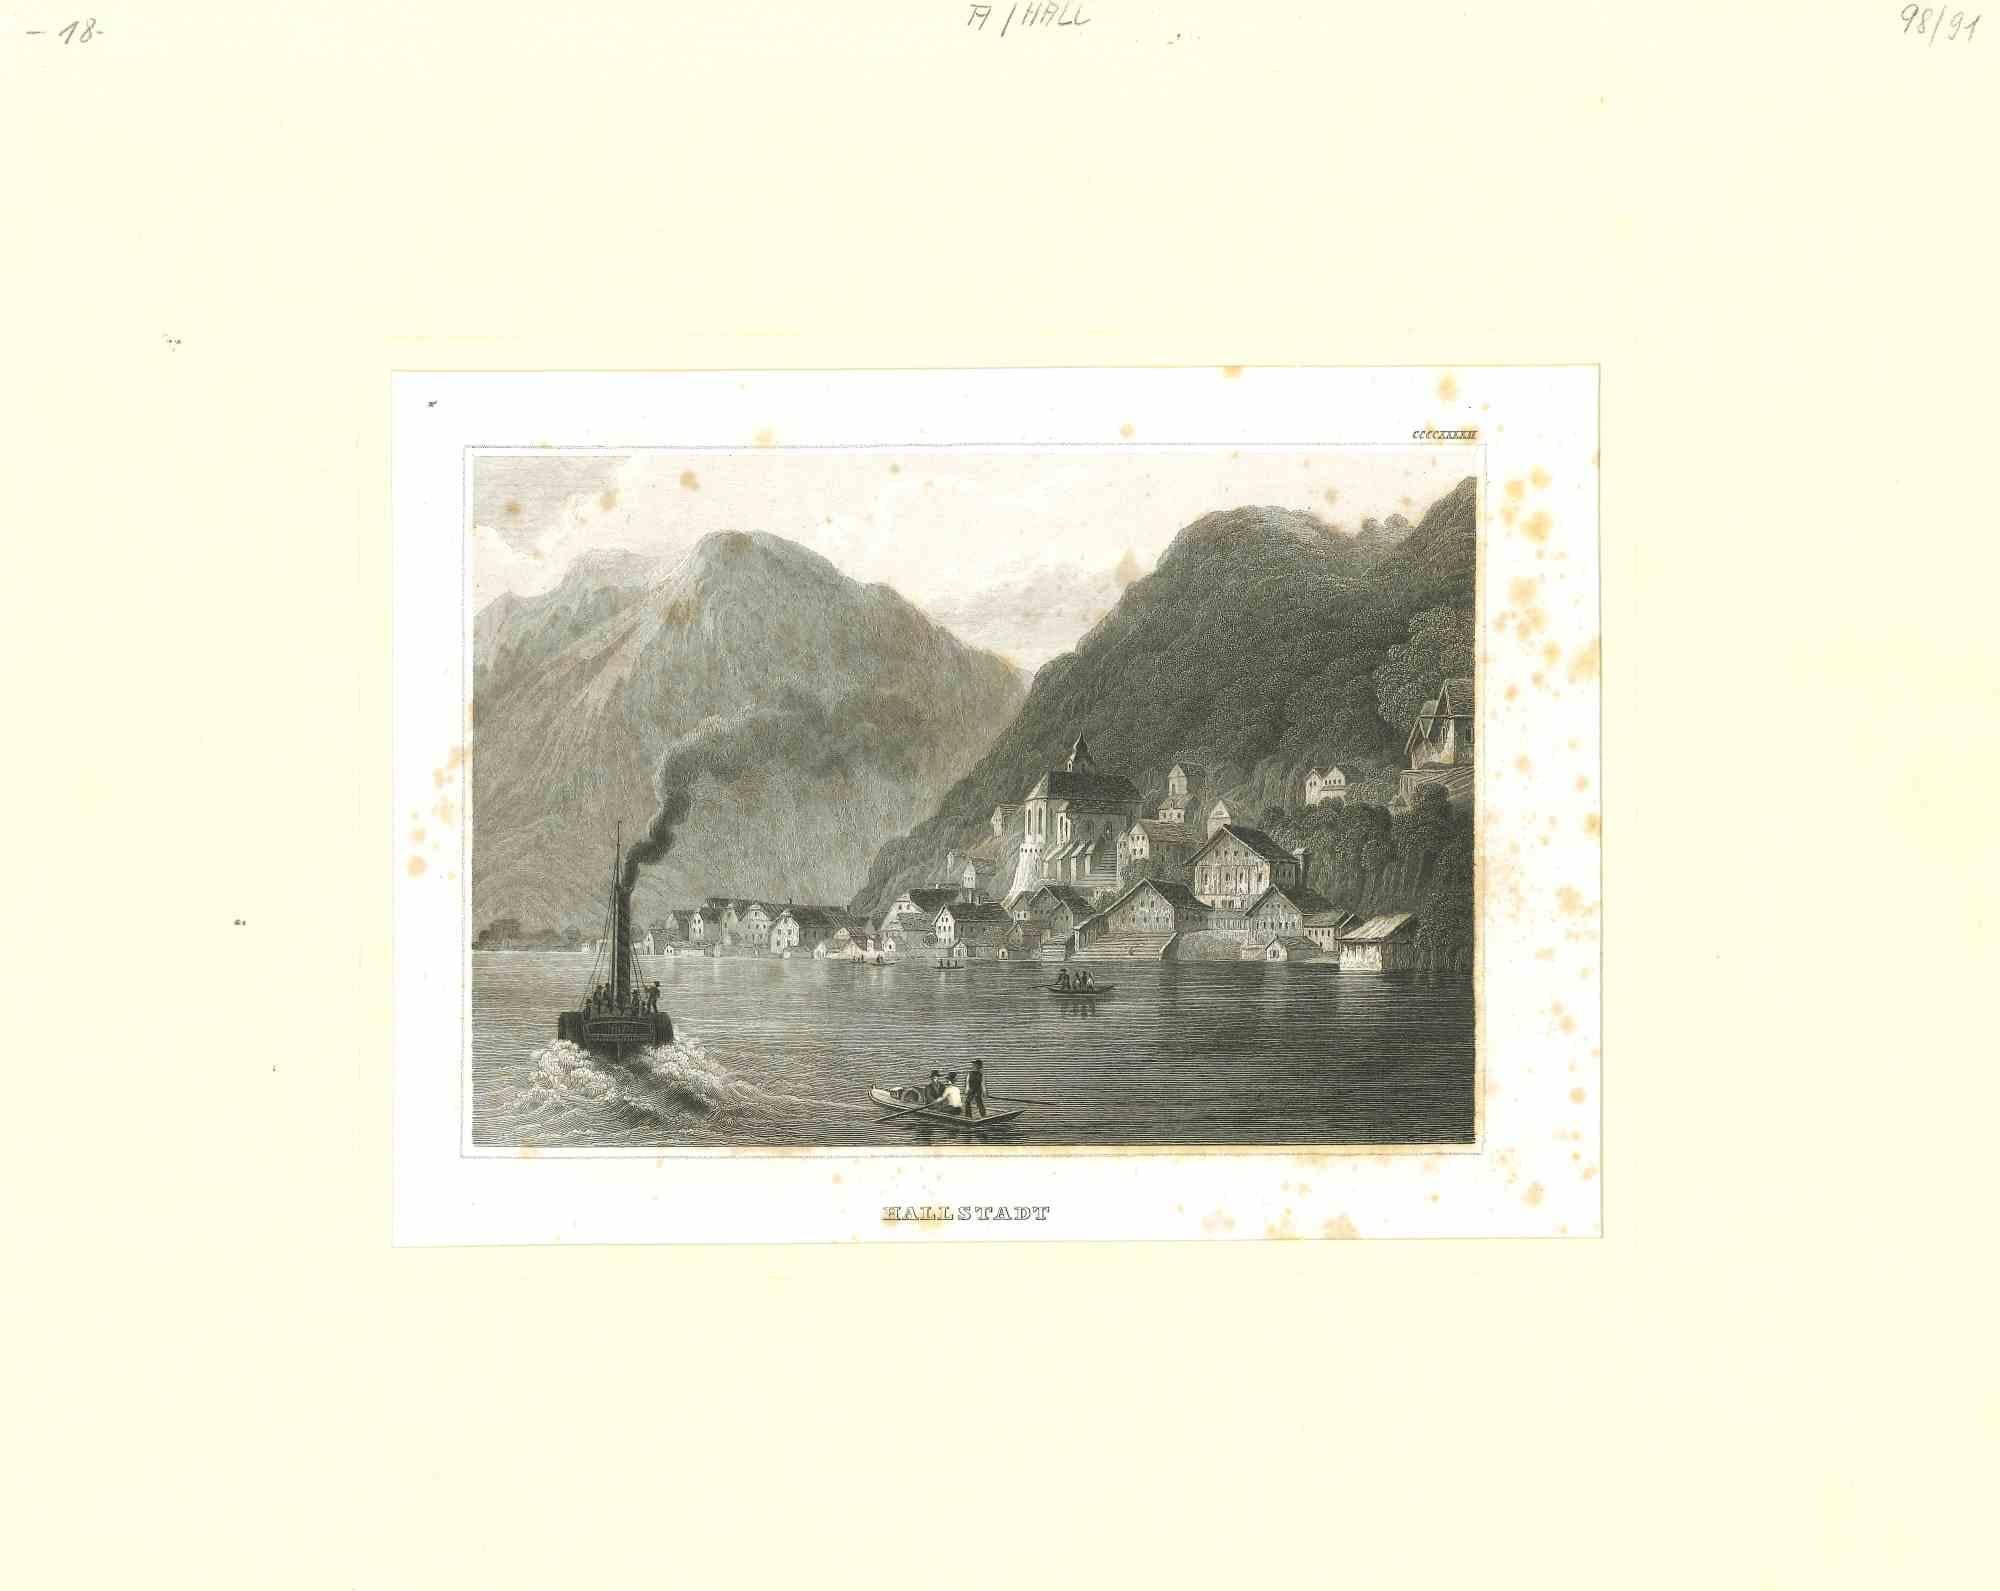 Unknown Figurative Print - Ancient View of Hallstadt - Original Lithograph - Mid-19th Century